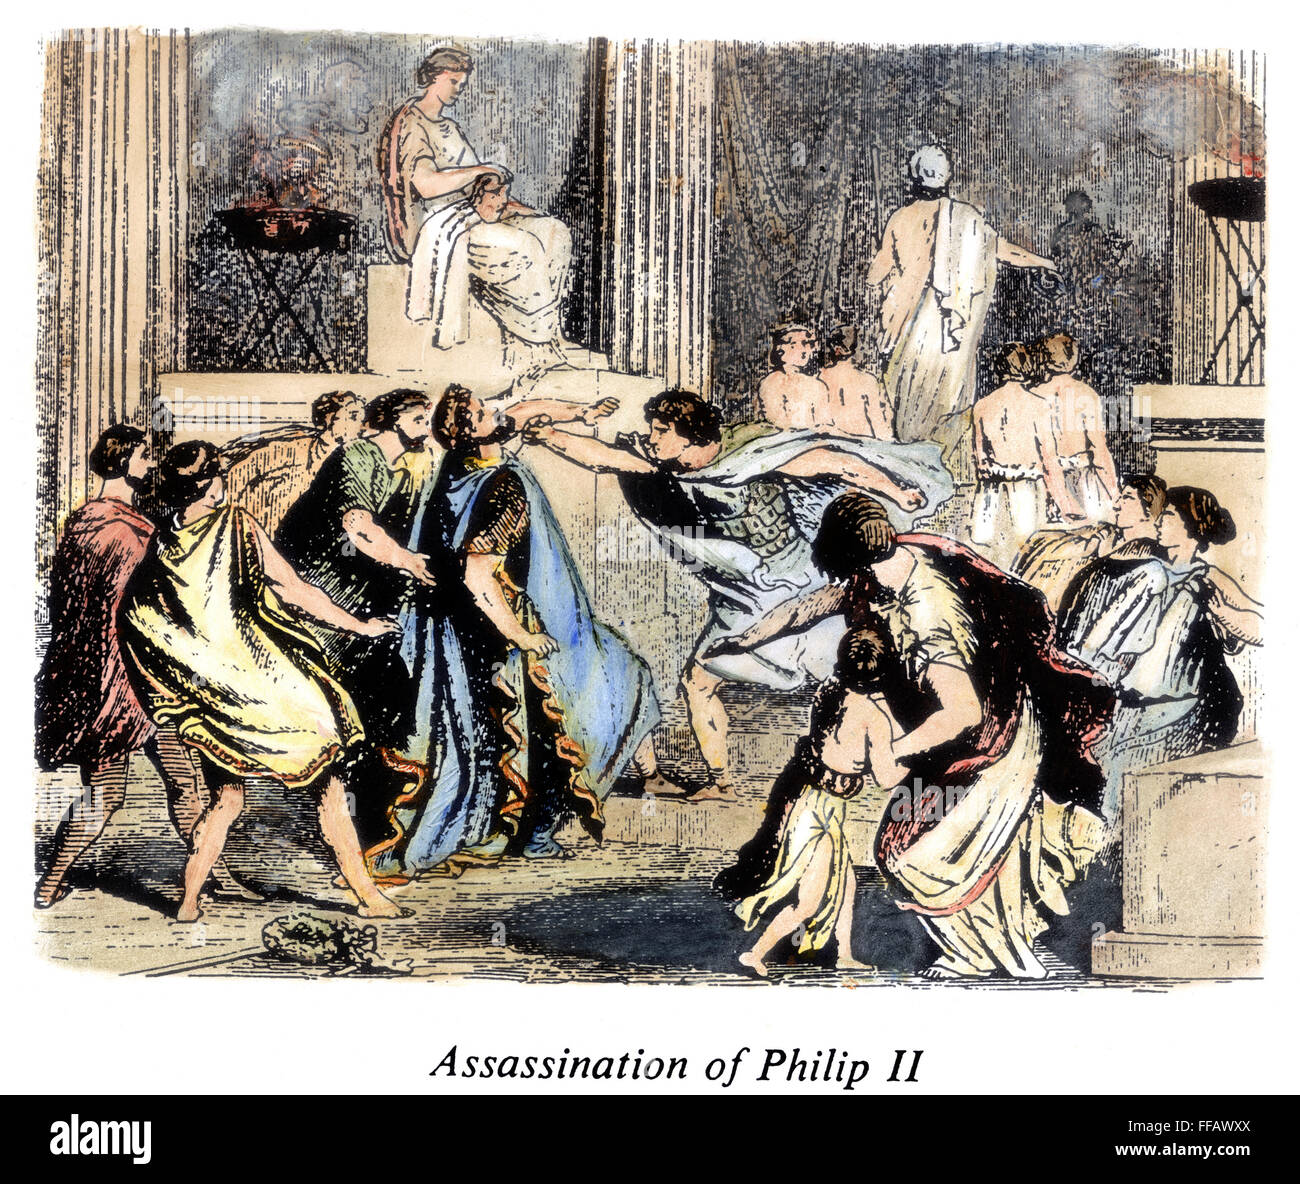 PHILIP II (382-336 B.C.). /nKing of Macedon, 359-336 B.C. The assassination of King Philip by one of his courtiers, Pausanias, allegedly incited by Philip's former wife Olympias, whom he had divorced to marry another. Line engraving, 19th century. Stock Photo